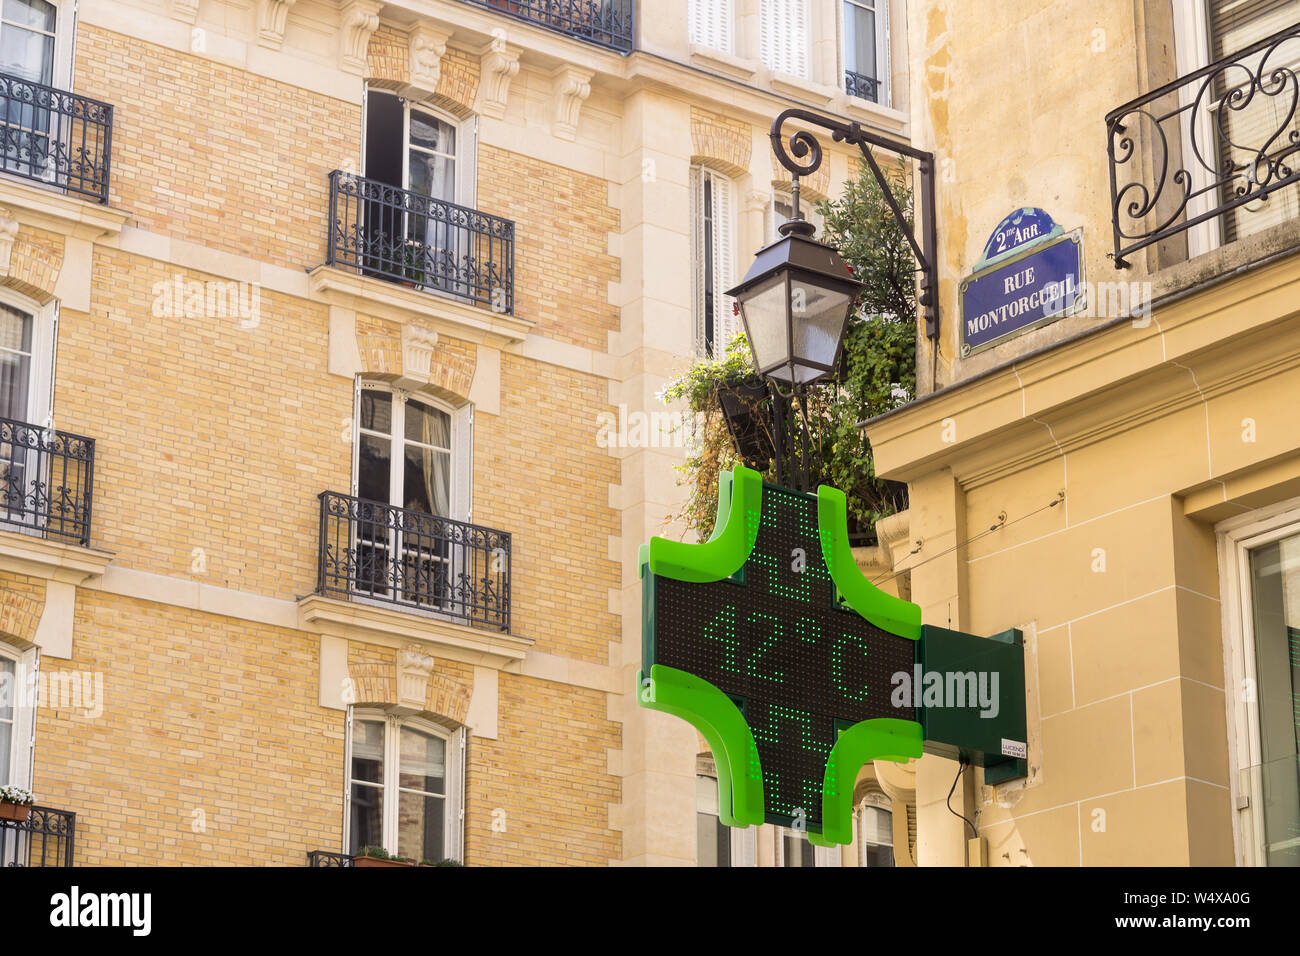 Paris heat wave 2019 - street thermometer on Rue Montorgueil in the 2nd arrondissement showing 42 C (108 F) on 25th July 2019 in Paris, France, Europe Stock Photo